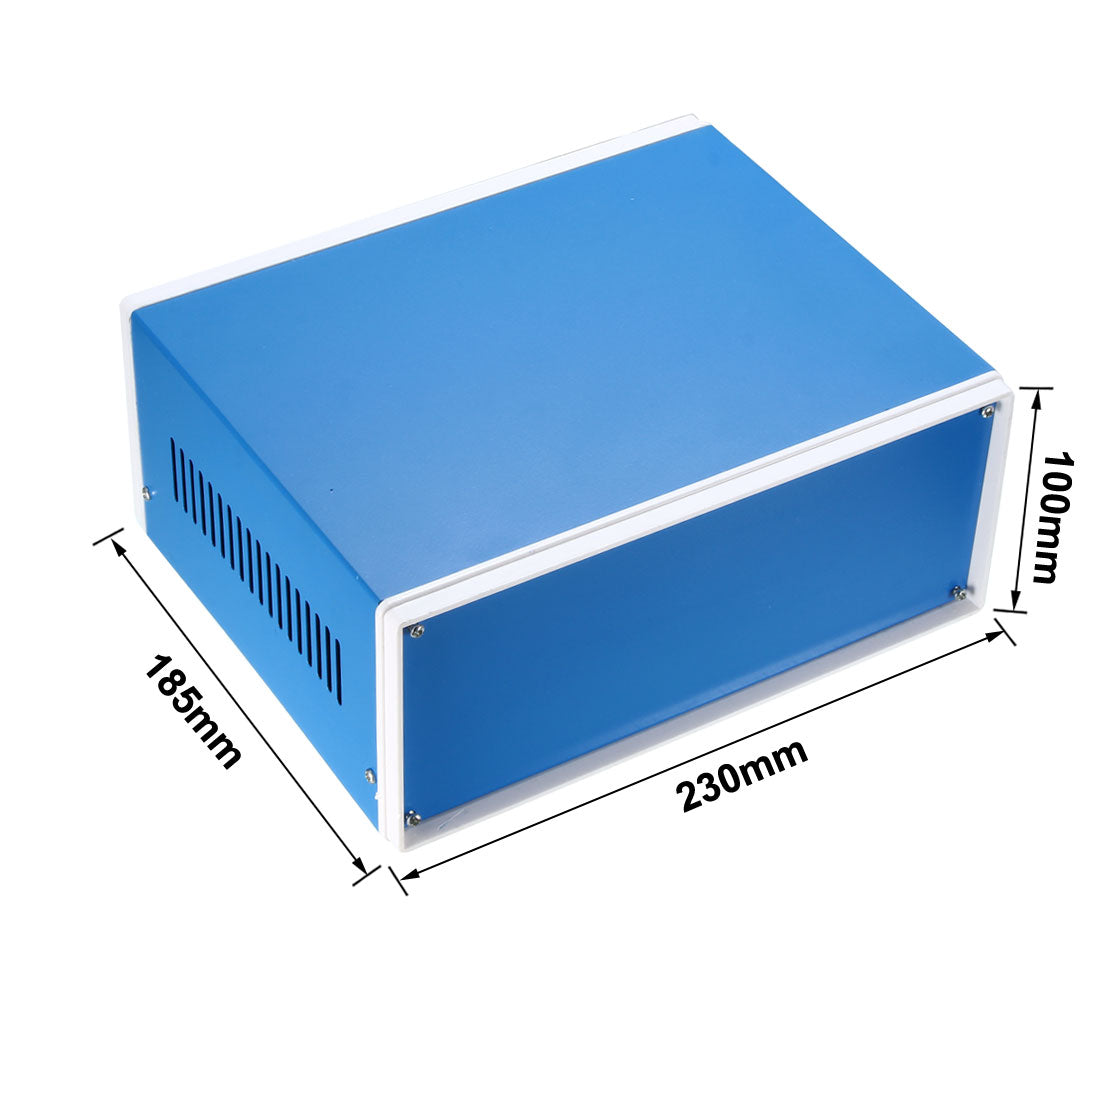 uxcell Uxcell 230 x 185 x 100 Electronic Iron DIY Junction Box Enclosure Case Blue